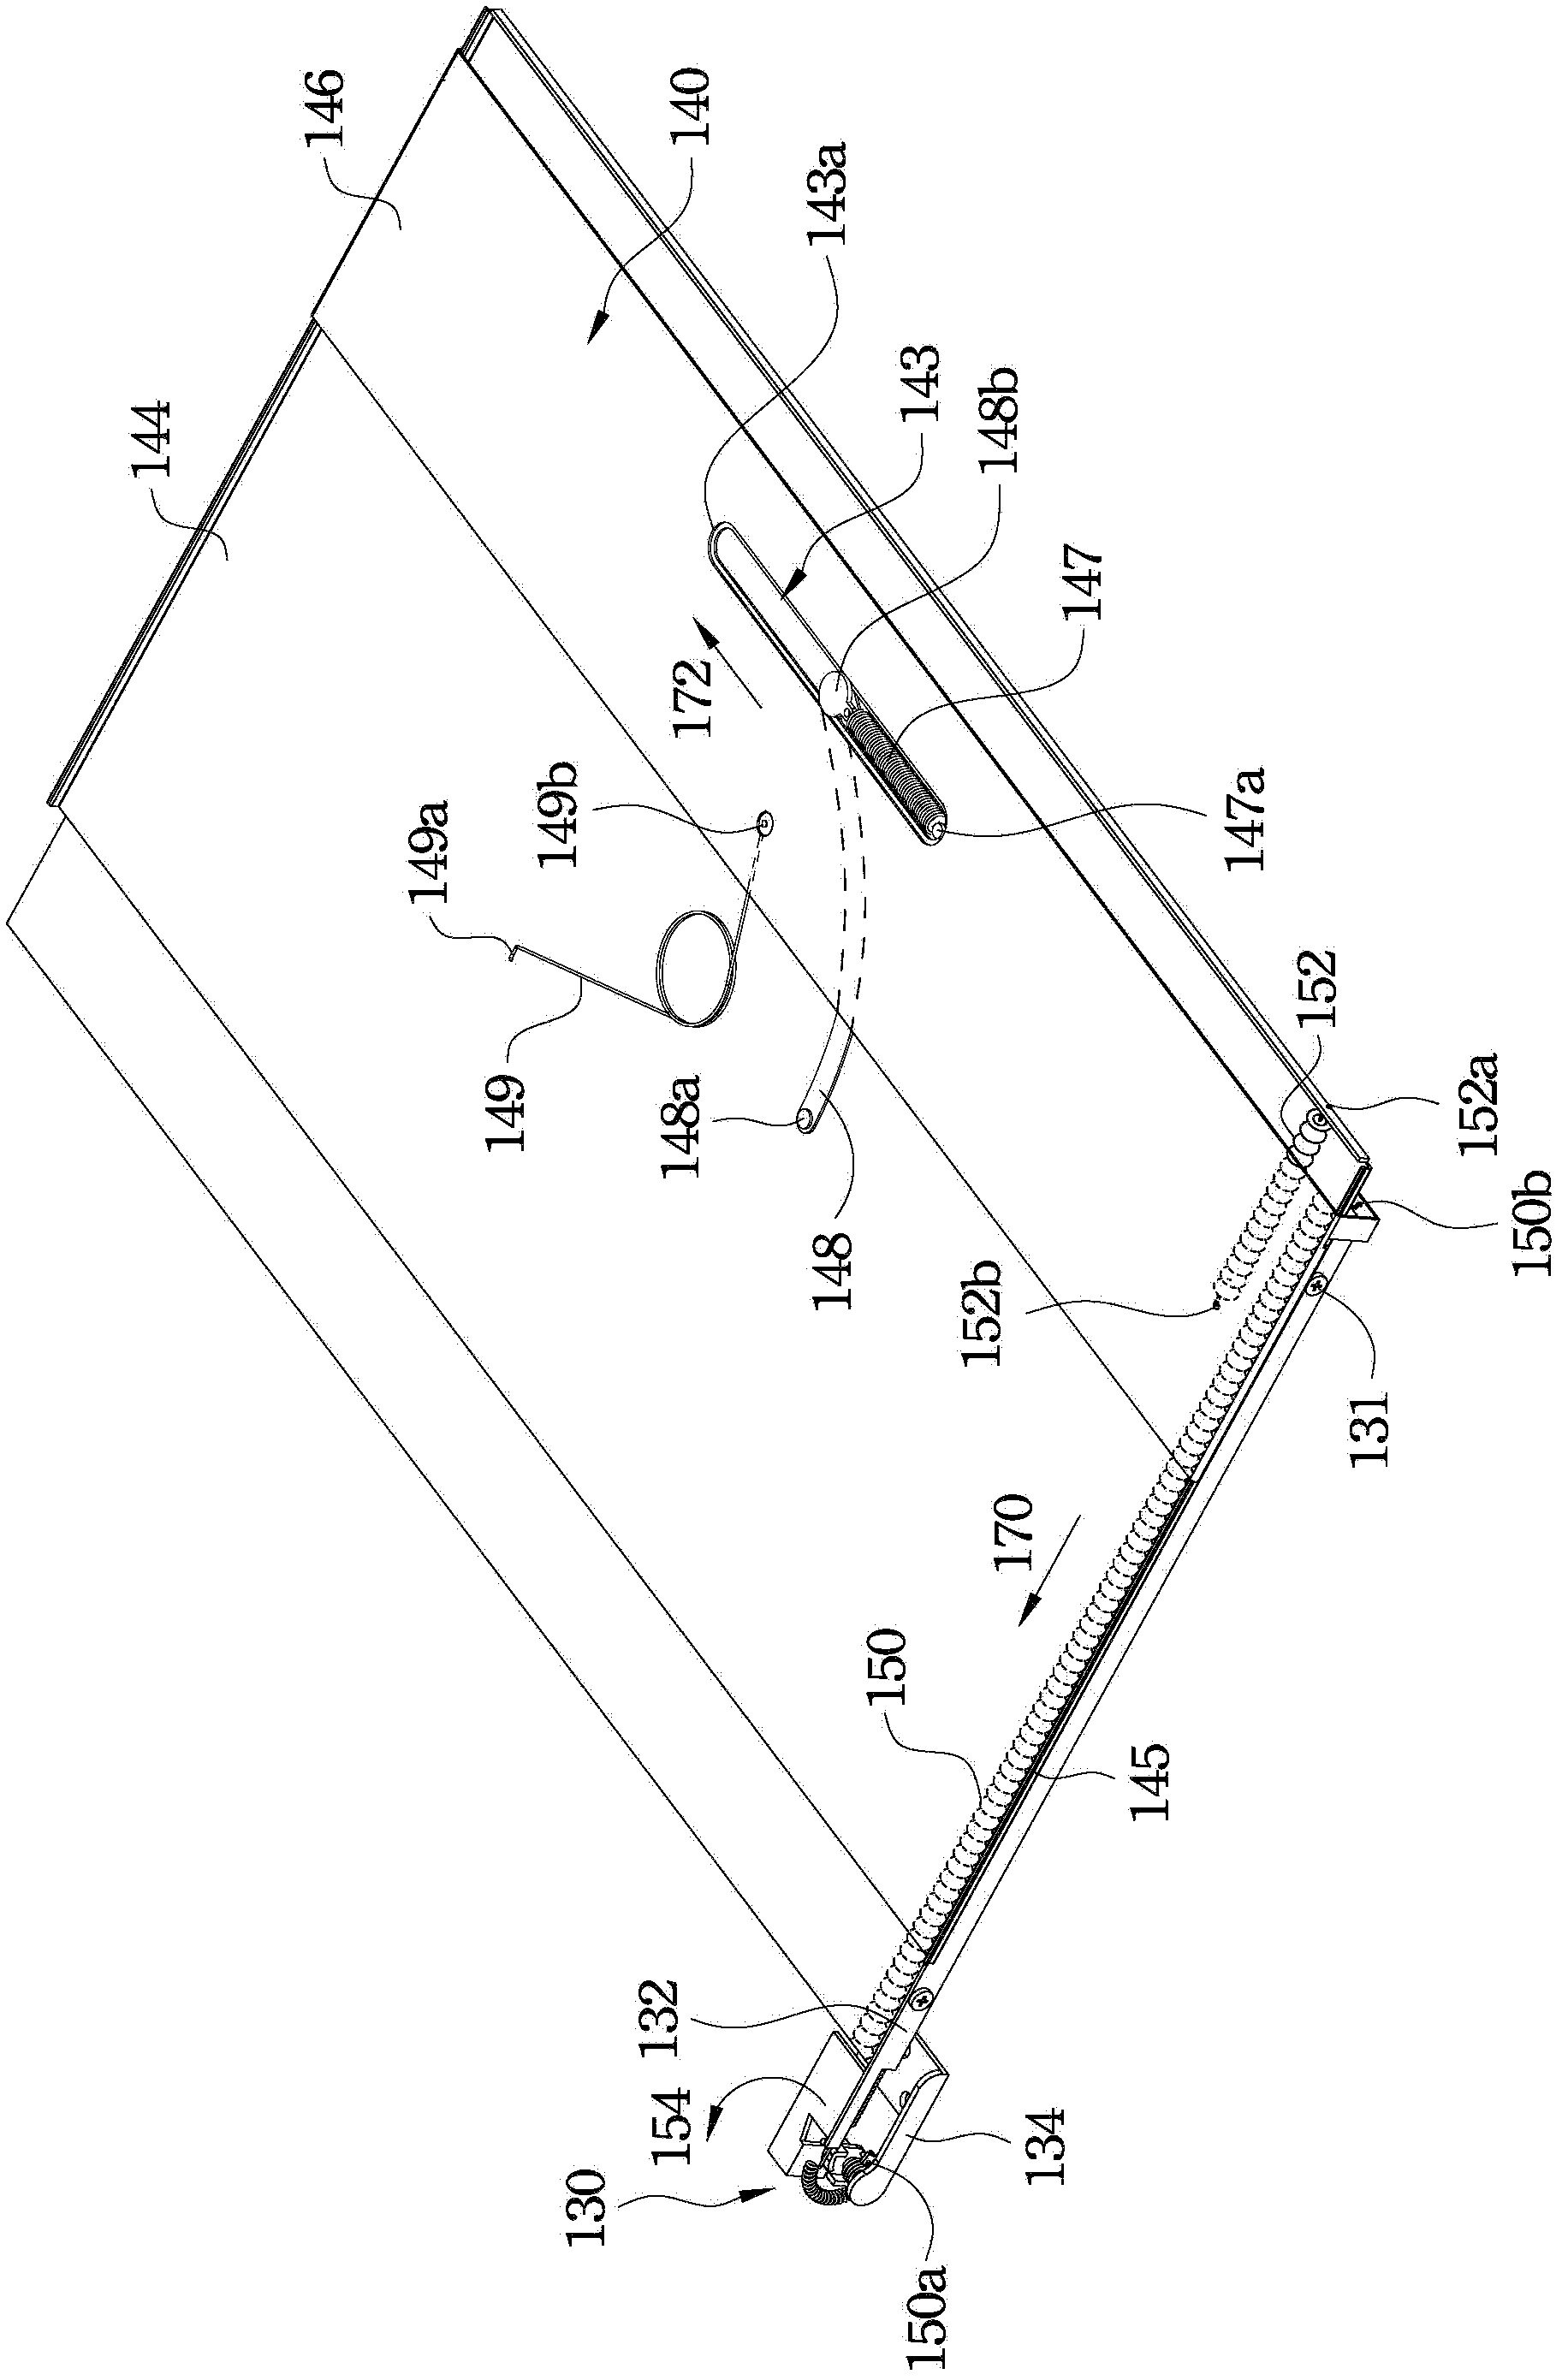 Electronic device with cleaning mechanism capable of cleaning display panel thereof